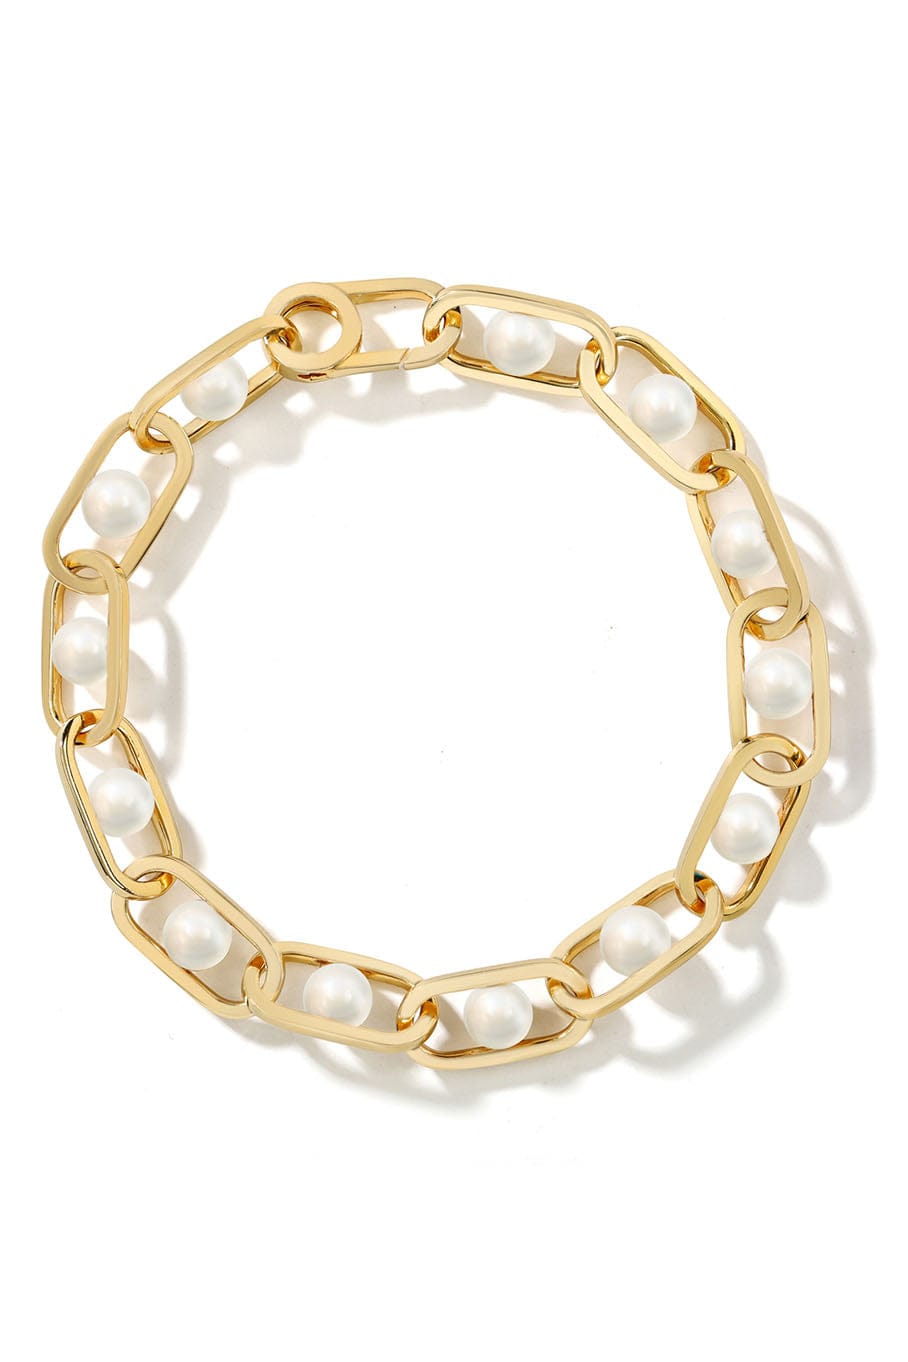 STATE PROPERTY-Allegory Pearl Bracelet-YELLOW GOLD